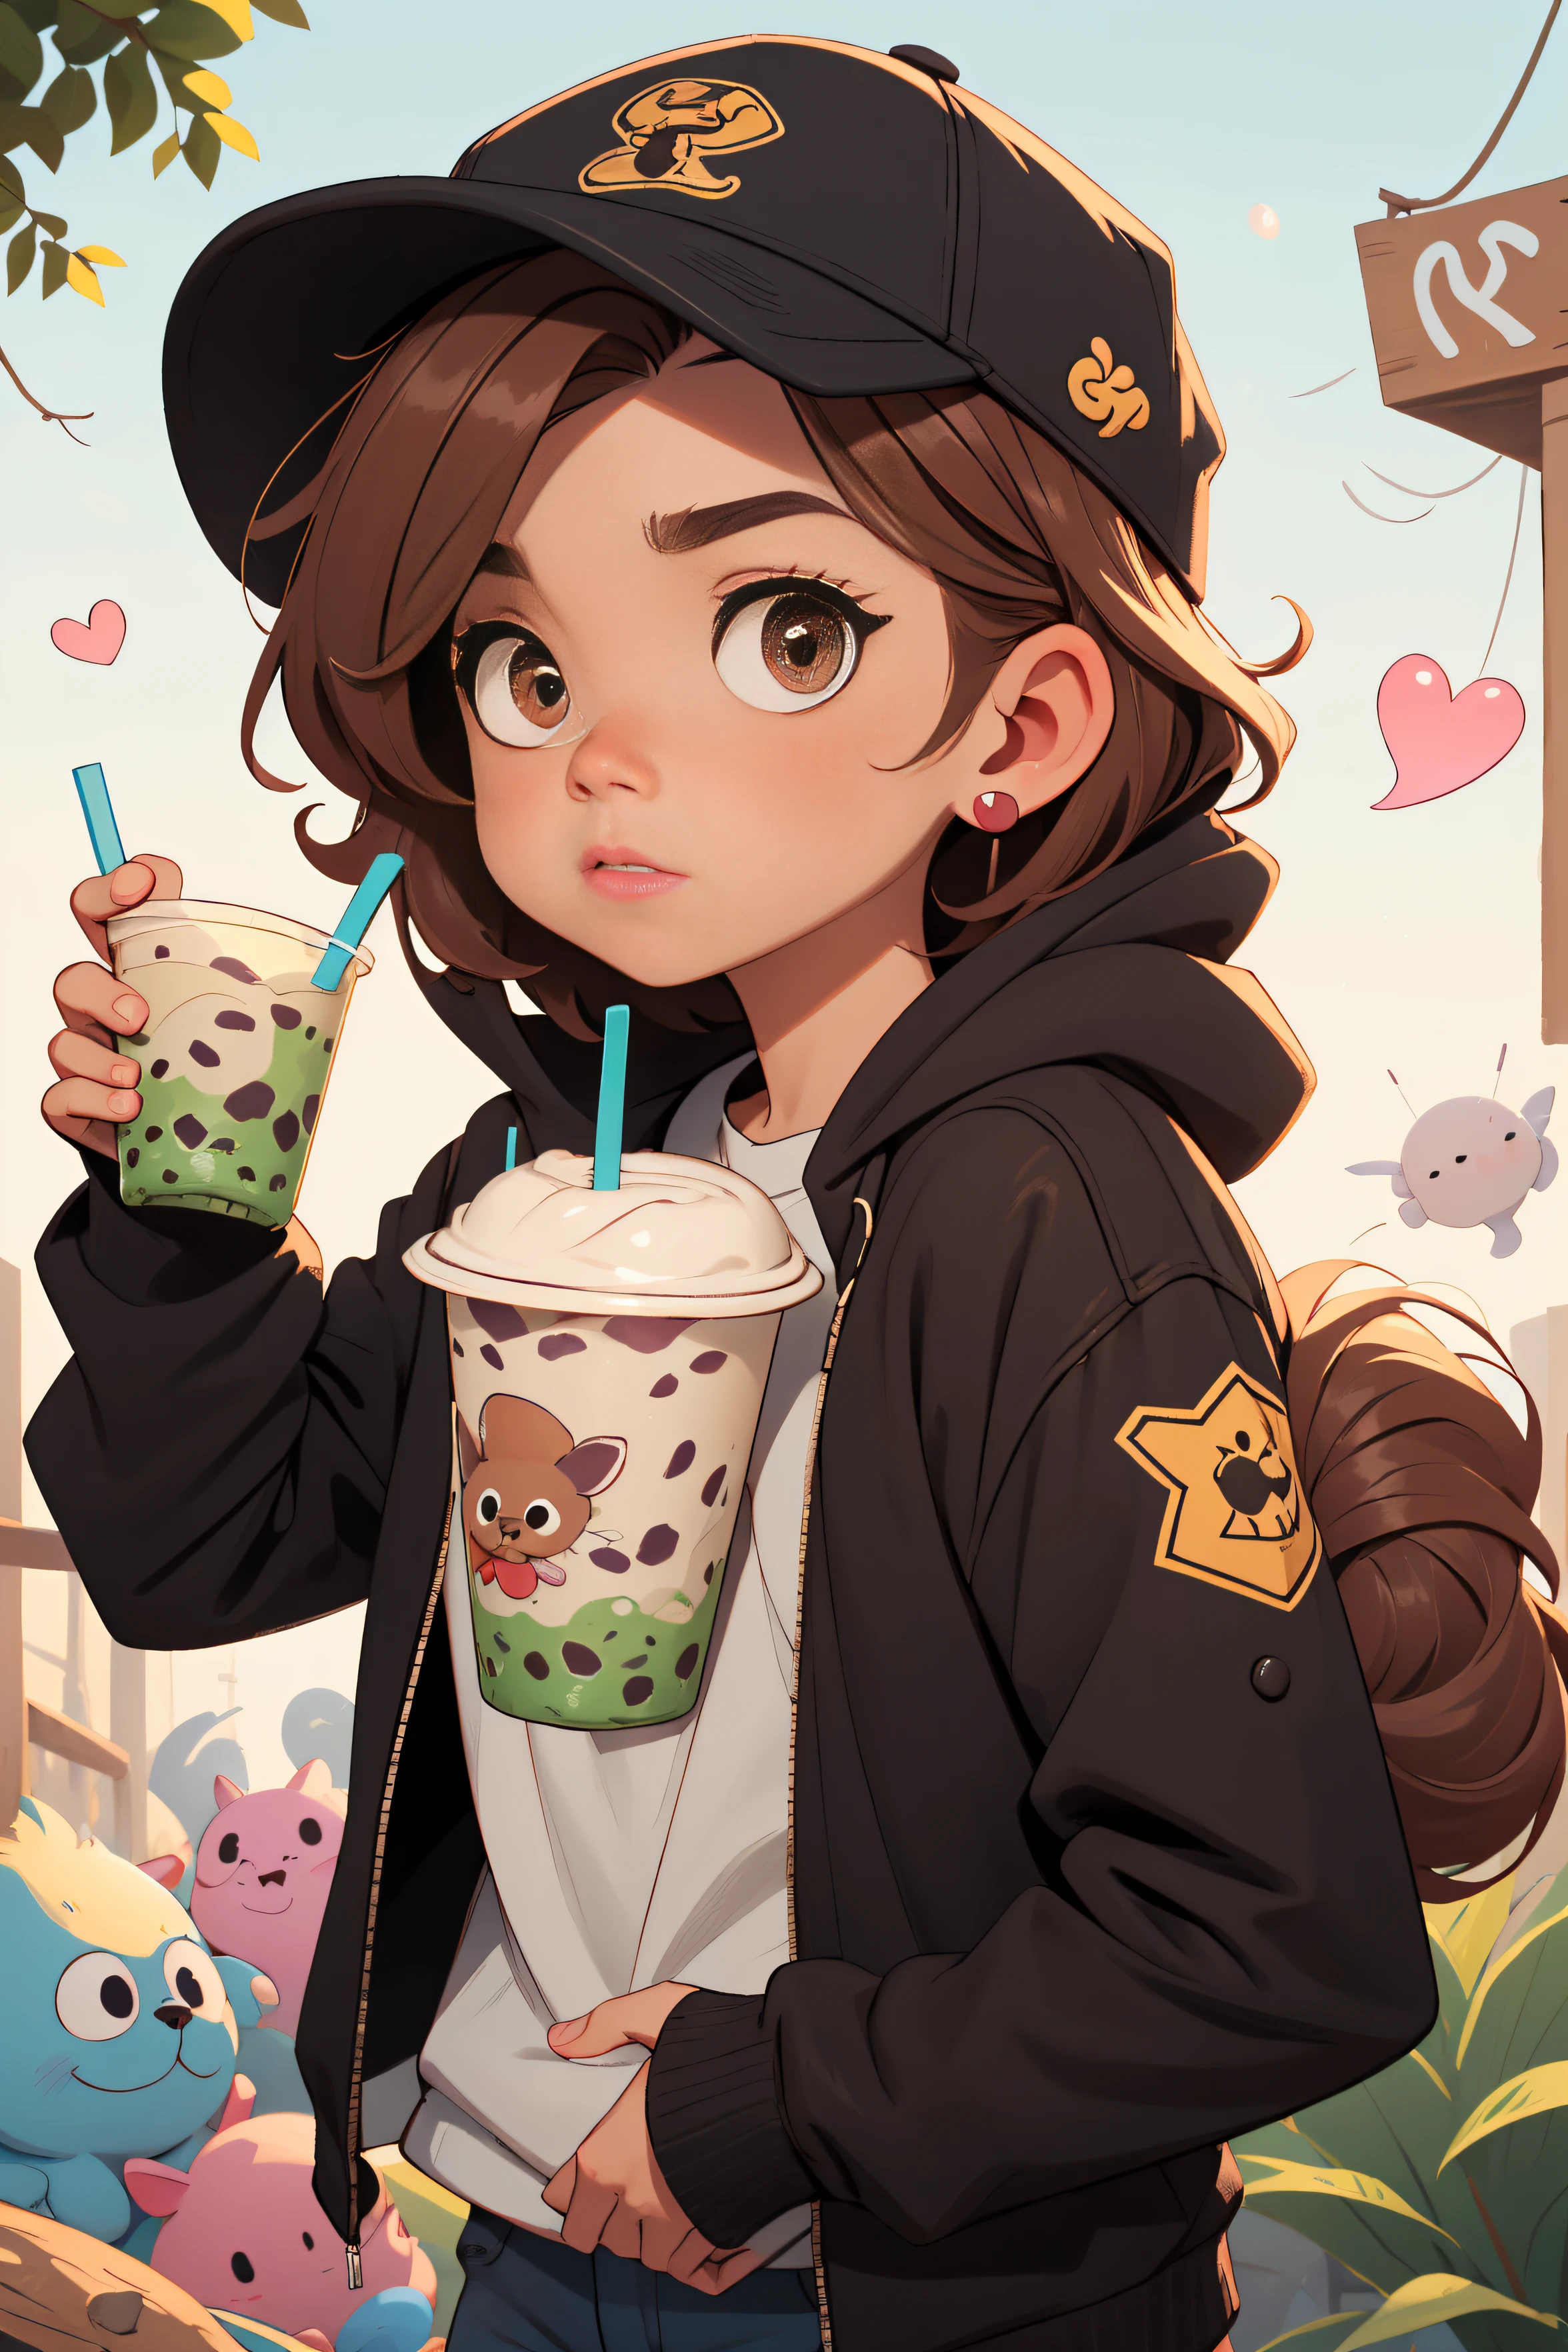 Memphis,1girl, eyes large,standing alone, suit jacket, animal ears, mitts, tail, upperbody,  hat, holding, brown hair, open jacket, drinking straw, black gloves, clothes open, long  hair, pointy ears,  Black jacket, bubble tea, eyes browns, Looking at Viewer, chemise, baseball cap, Holding cup, Hood, jacket with a hood, hair between the eyes, blush, chemise branca, animal ear fluff, ears through headwear, bangss,  Heart, Cute and adorable cartoon